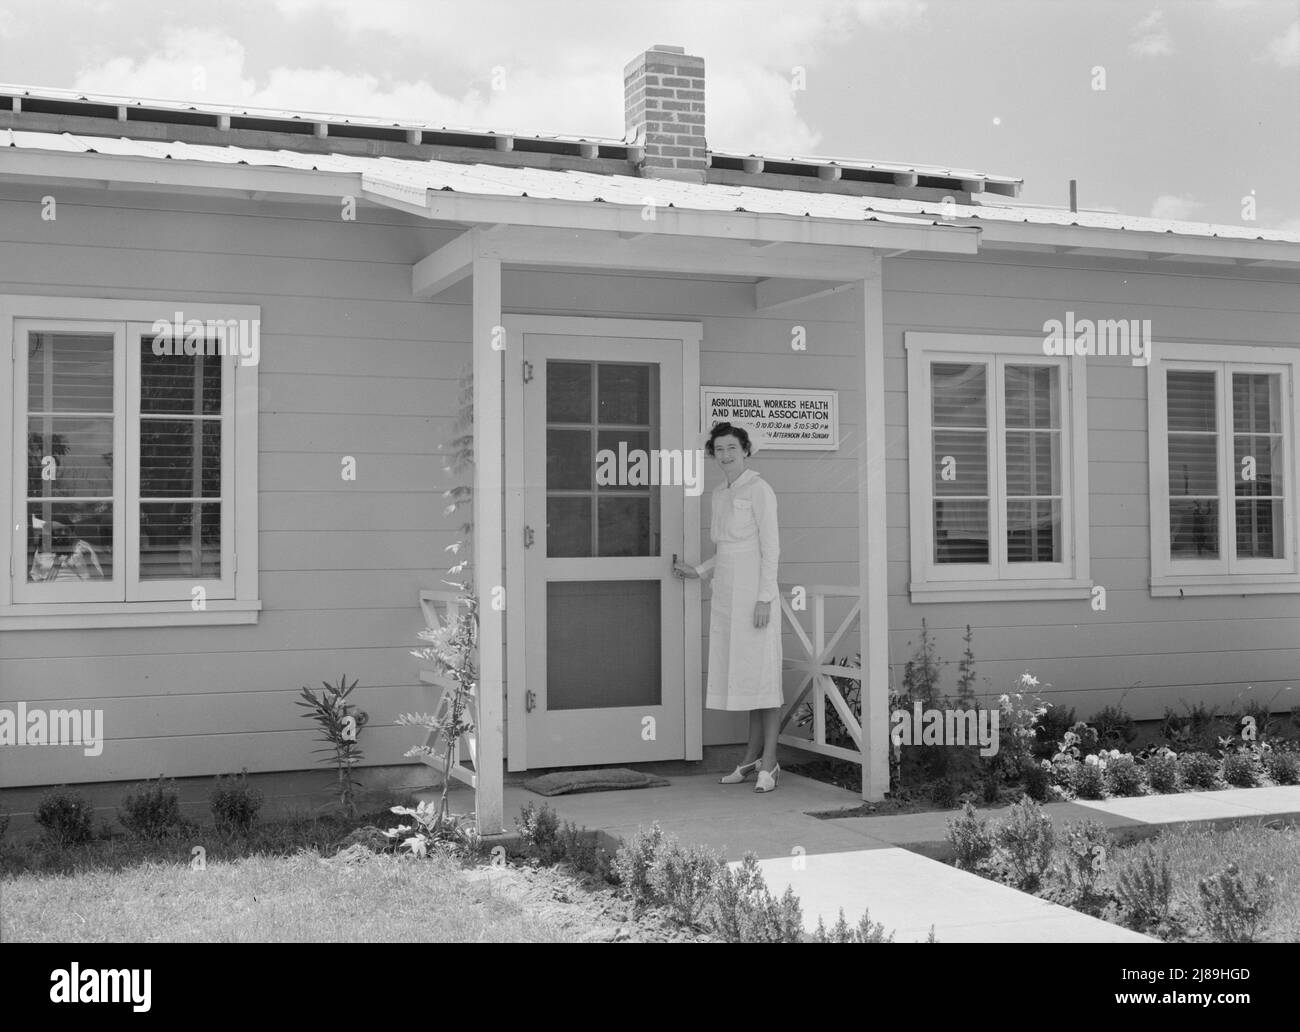 Tulare County, California. Farm Security Administration (FSA) camp for migratory agricultural workers at Farmersville. Resident nurse and clinic building of Agricultural Workers' Health and Medical Association. Stock Photo